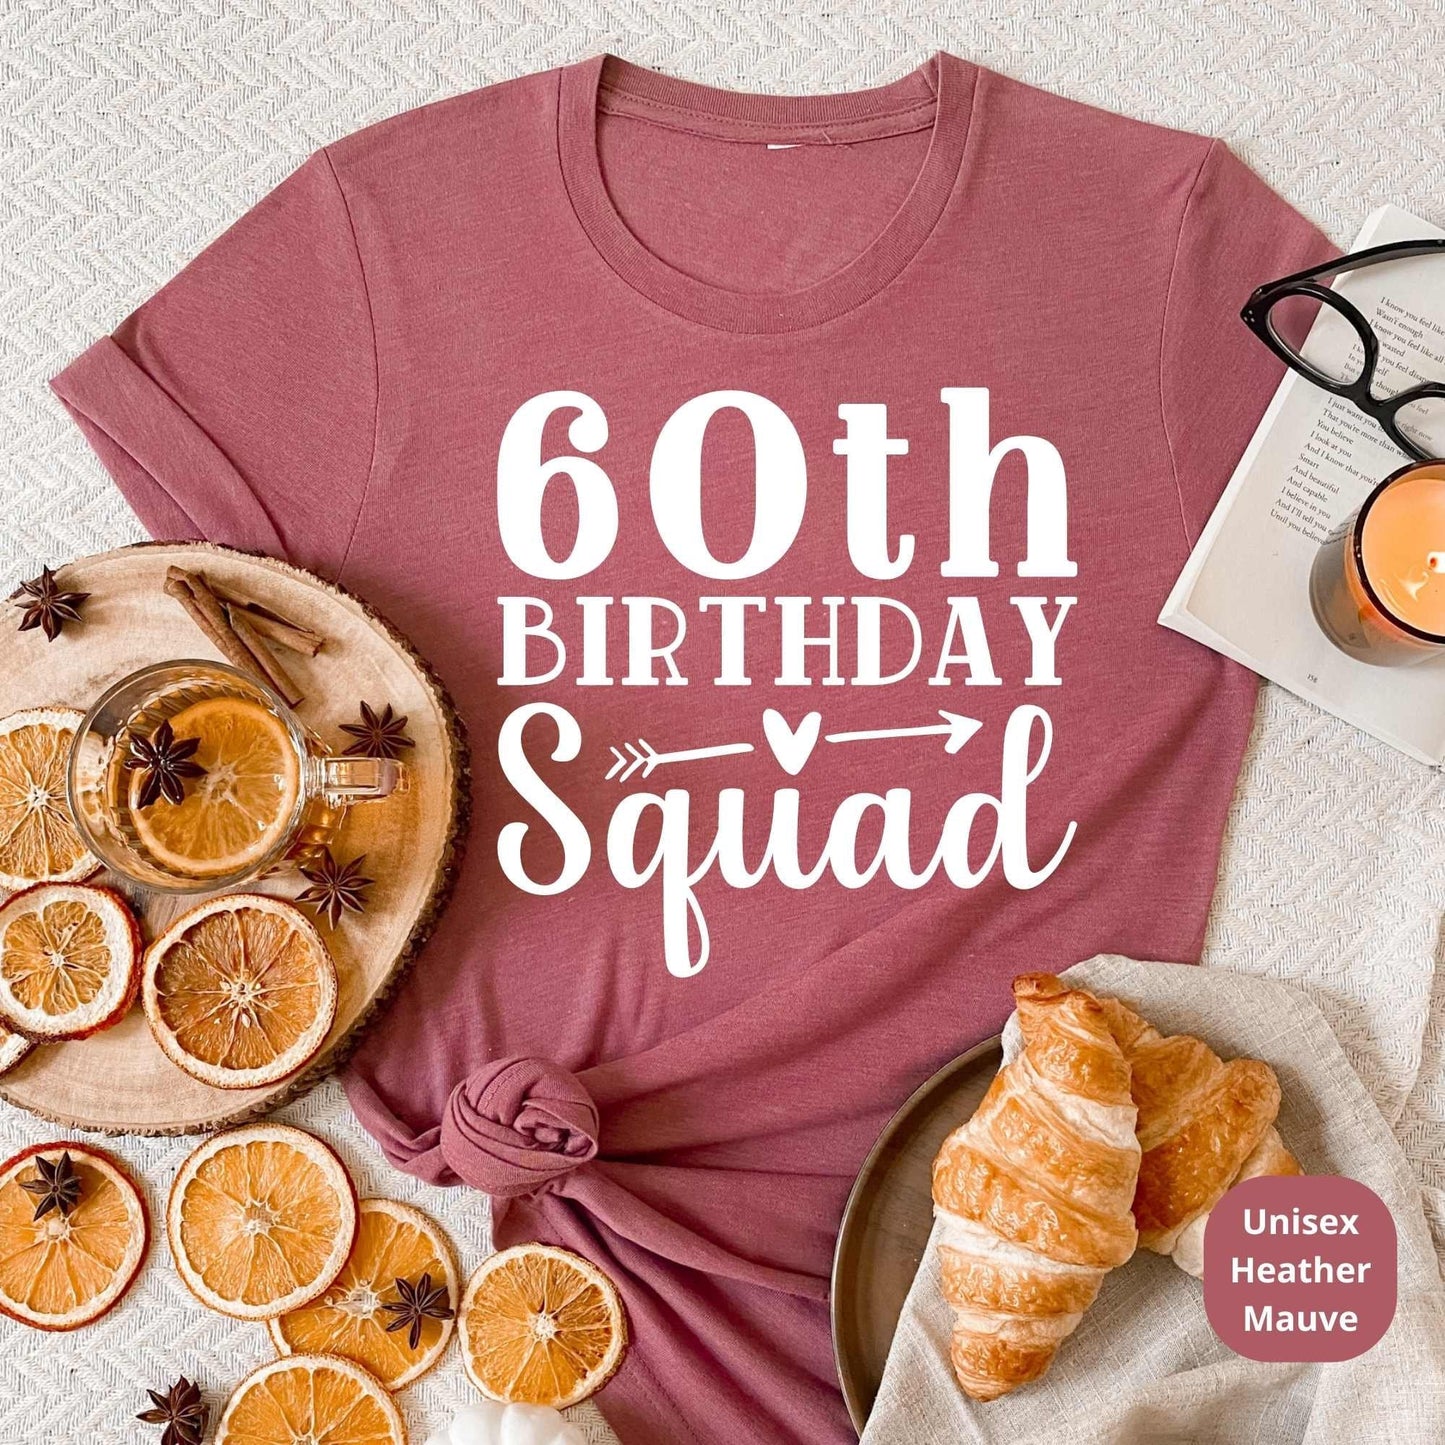 60th Birthday Squad Shirt, 60th Birthday Gift, Bday Crew T-Shirts, Family Matching Party Tees, Group Tshirts for Anniversary Celebration